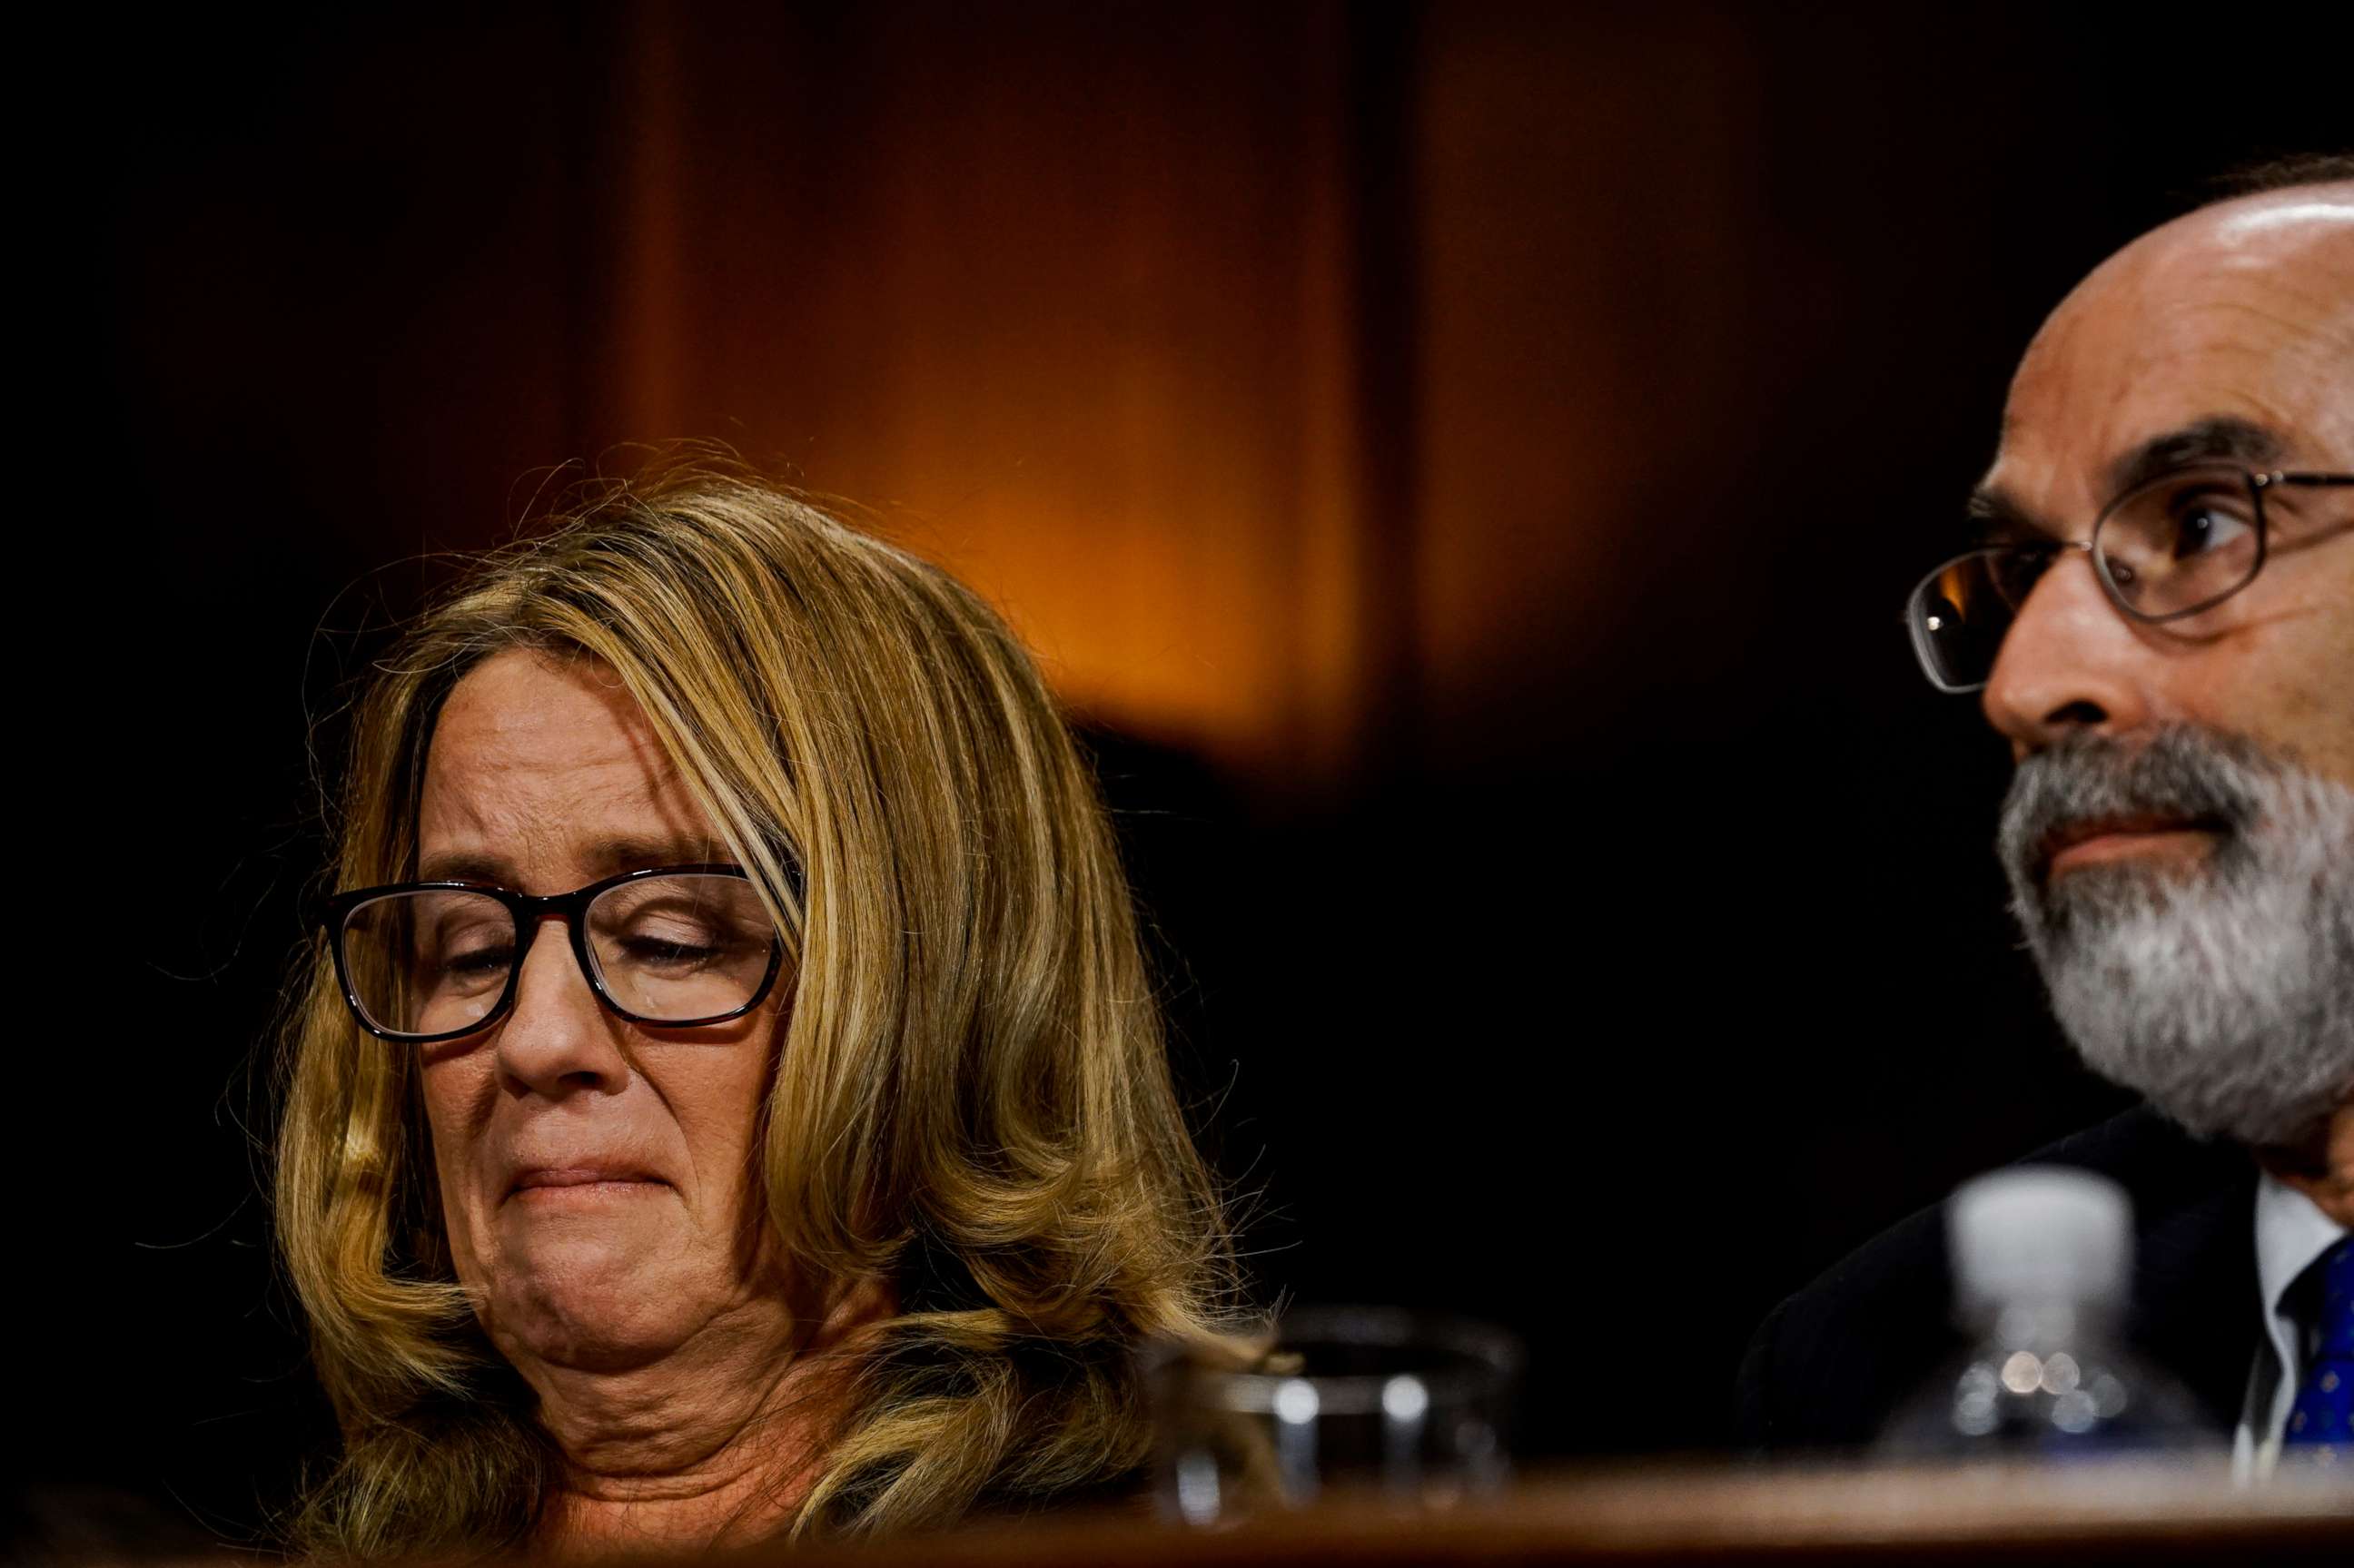 Photos Reveal The Drama Of The Kavanaugh Hearing And Christine Blasey Fords Testimony Photos 1323